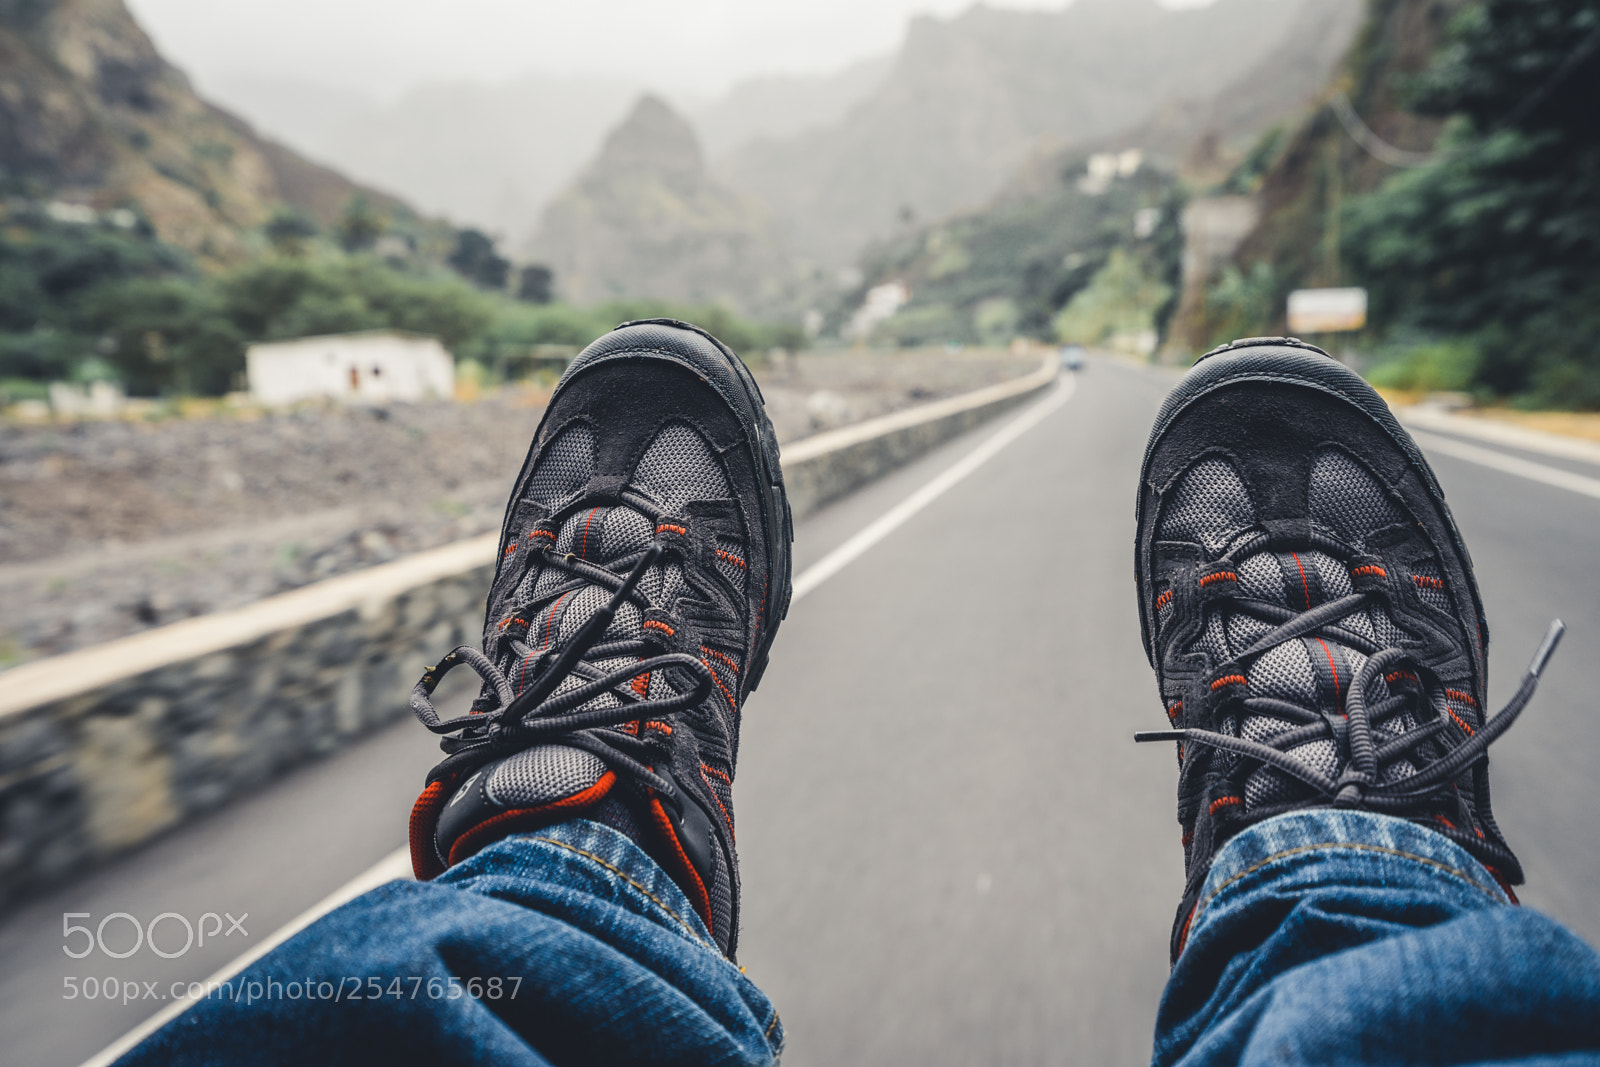 Sony a7 II sample photo. Relaxing feet with trekking photography